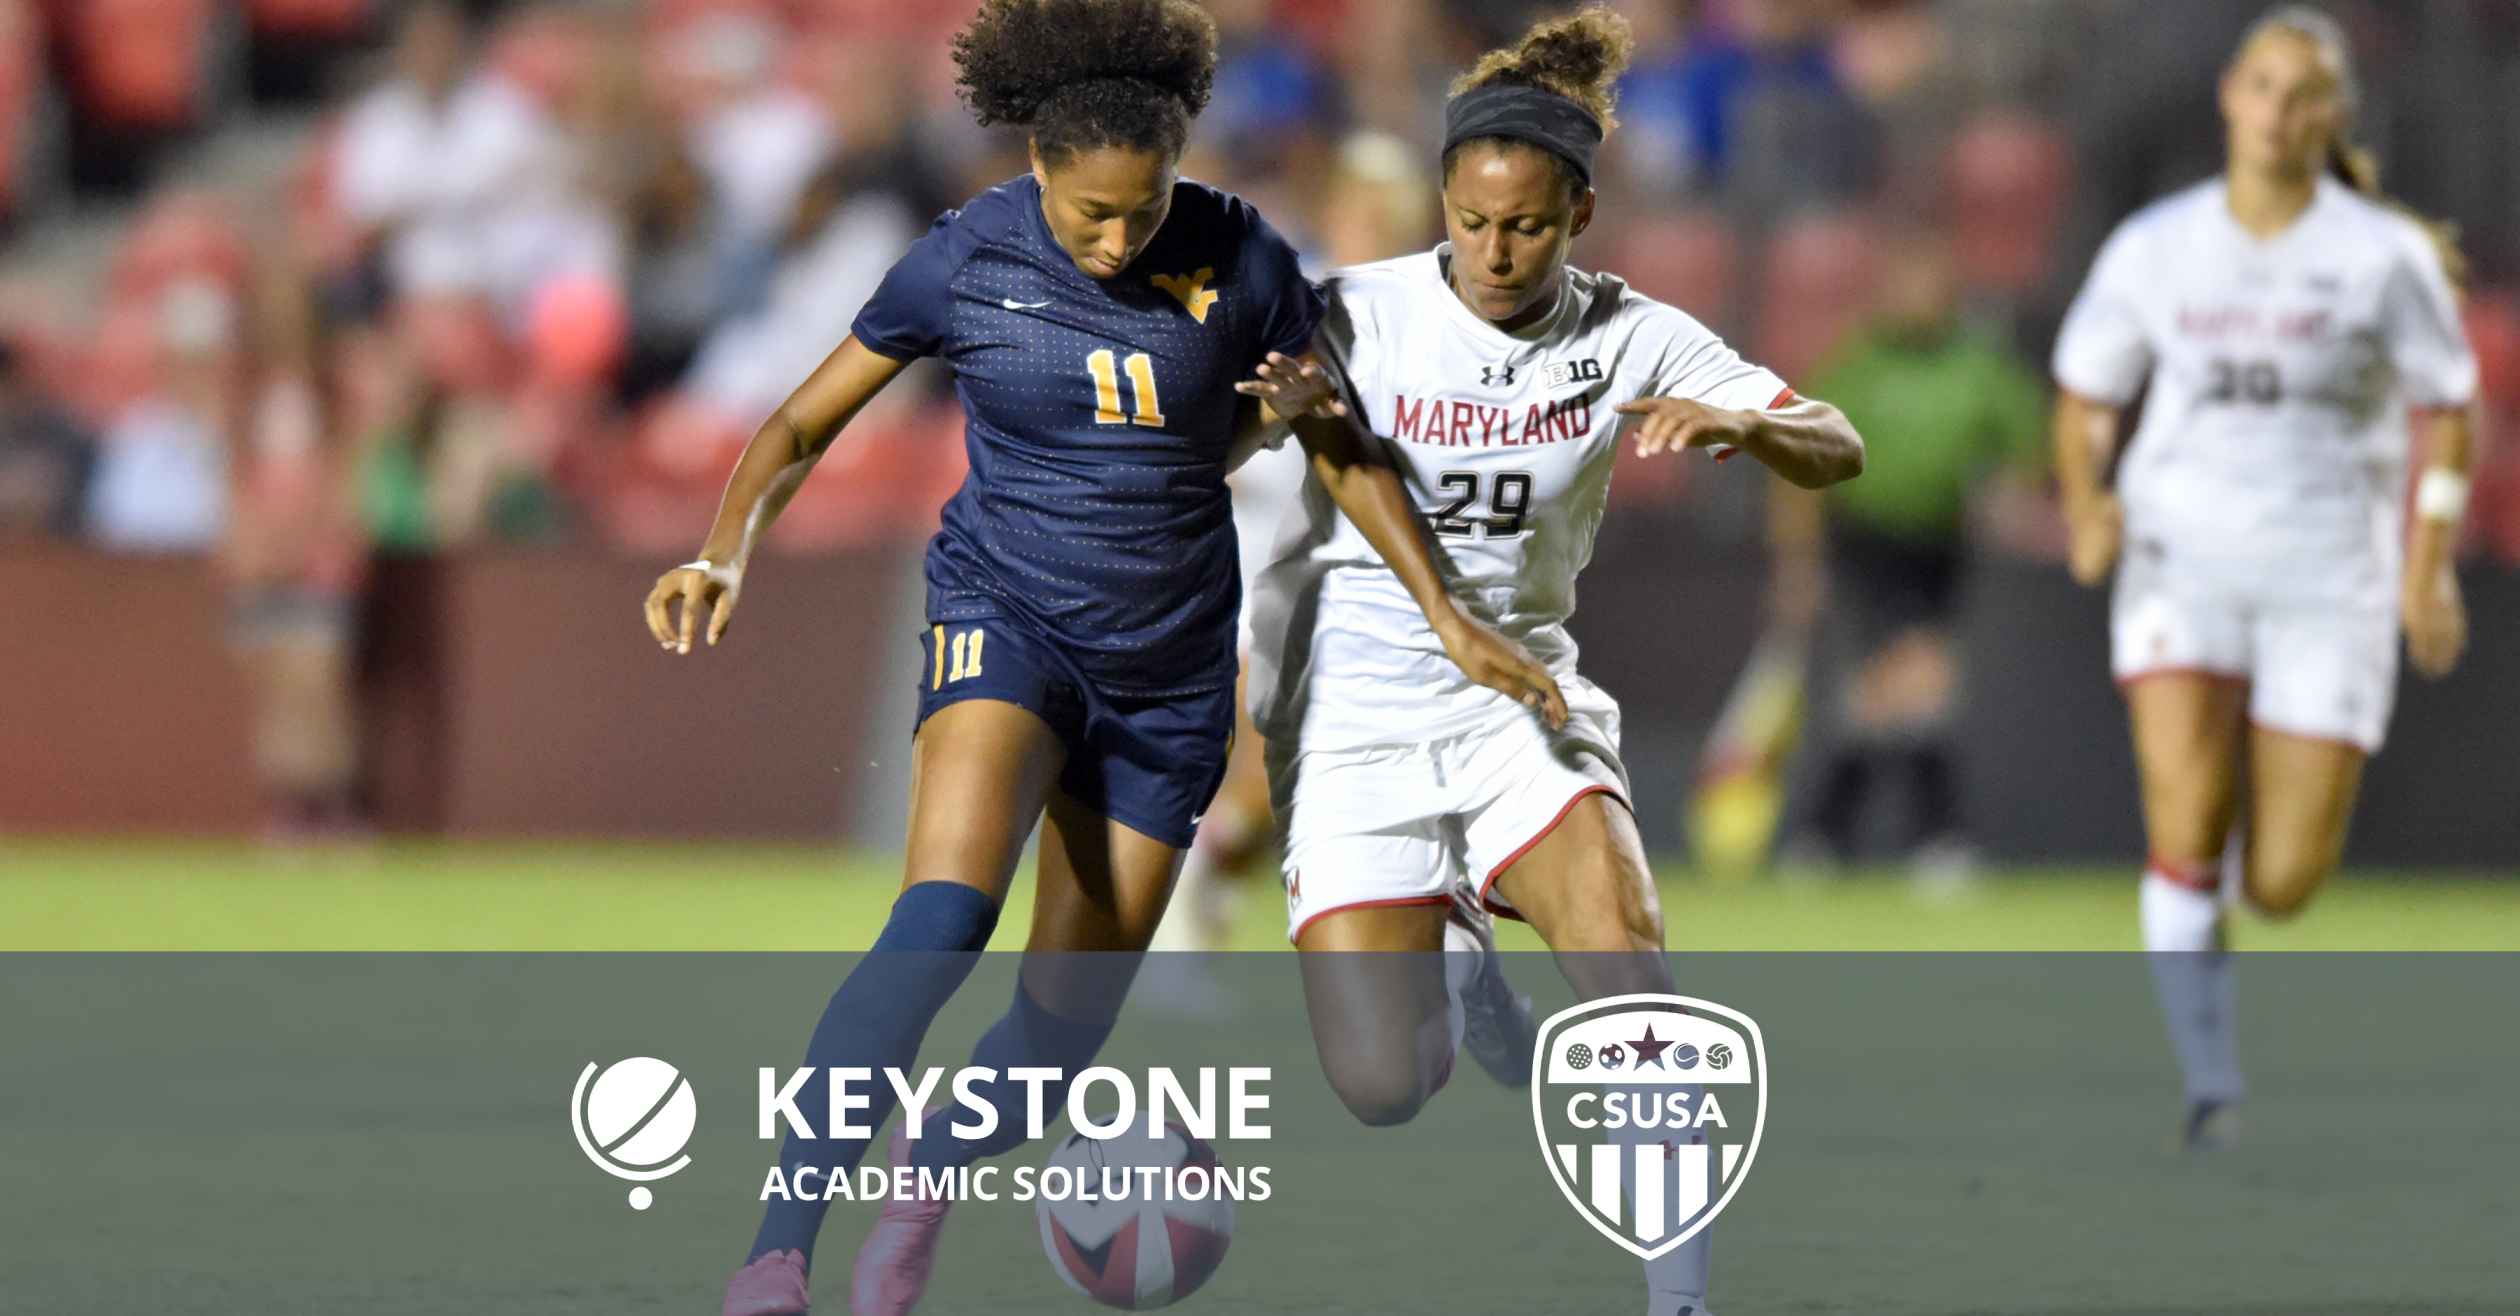 Keystone Academic Solutions Acquires US College Athletics Placement Firm